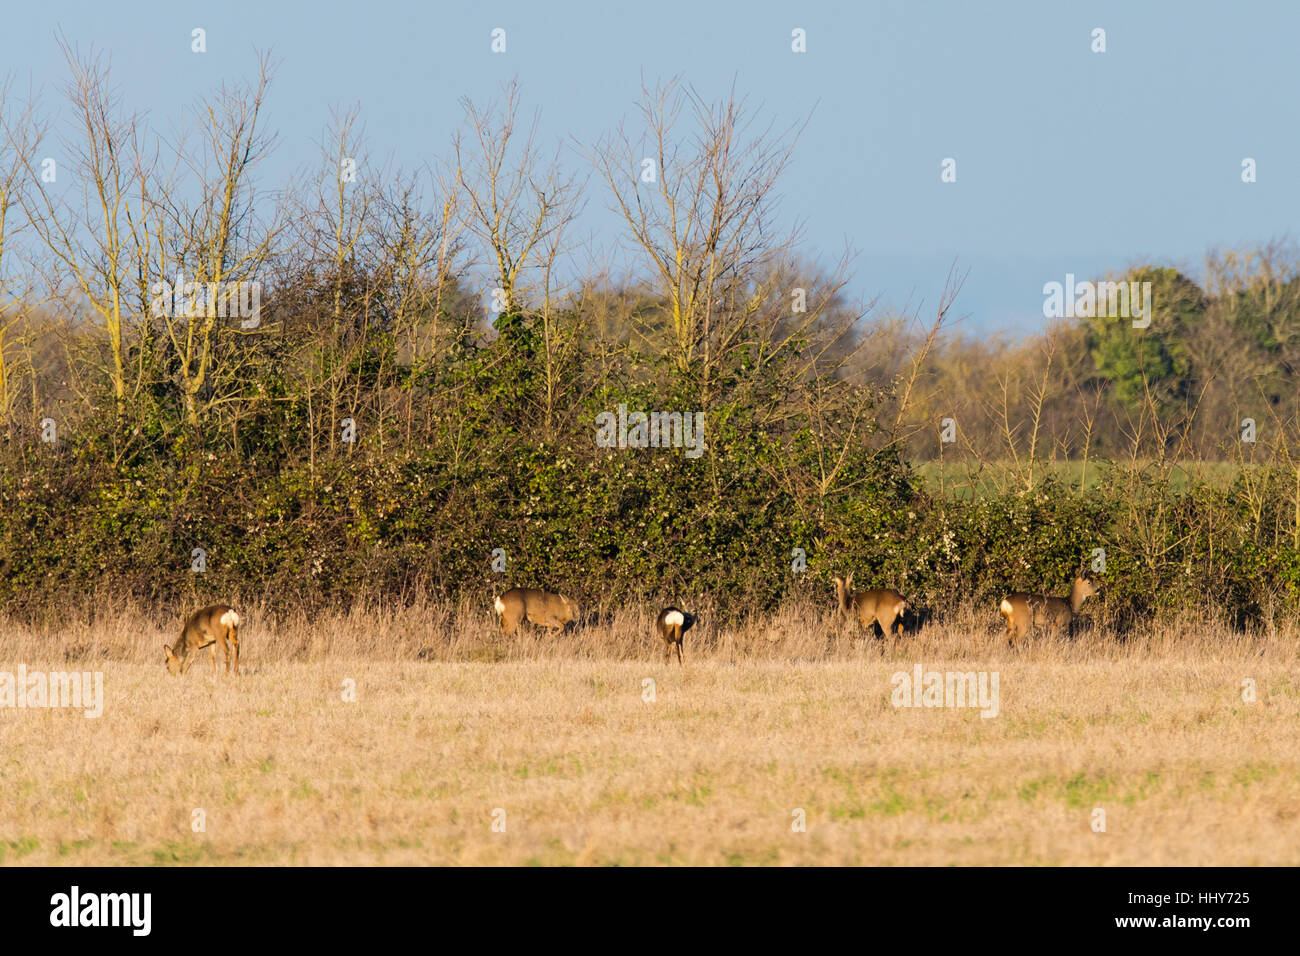 Herd of roe deer (Capreolus capreolus) grazing by hedgerow in family Cervidae, with white rump patches clearly visible Stock Photo